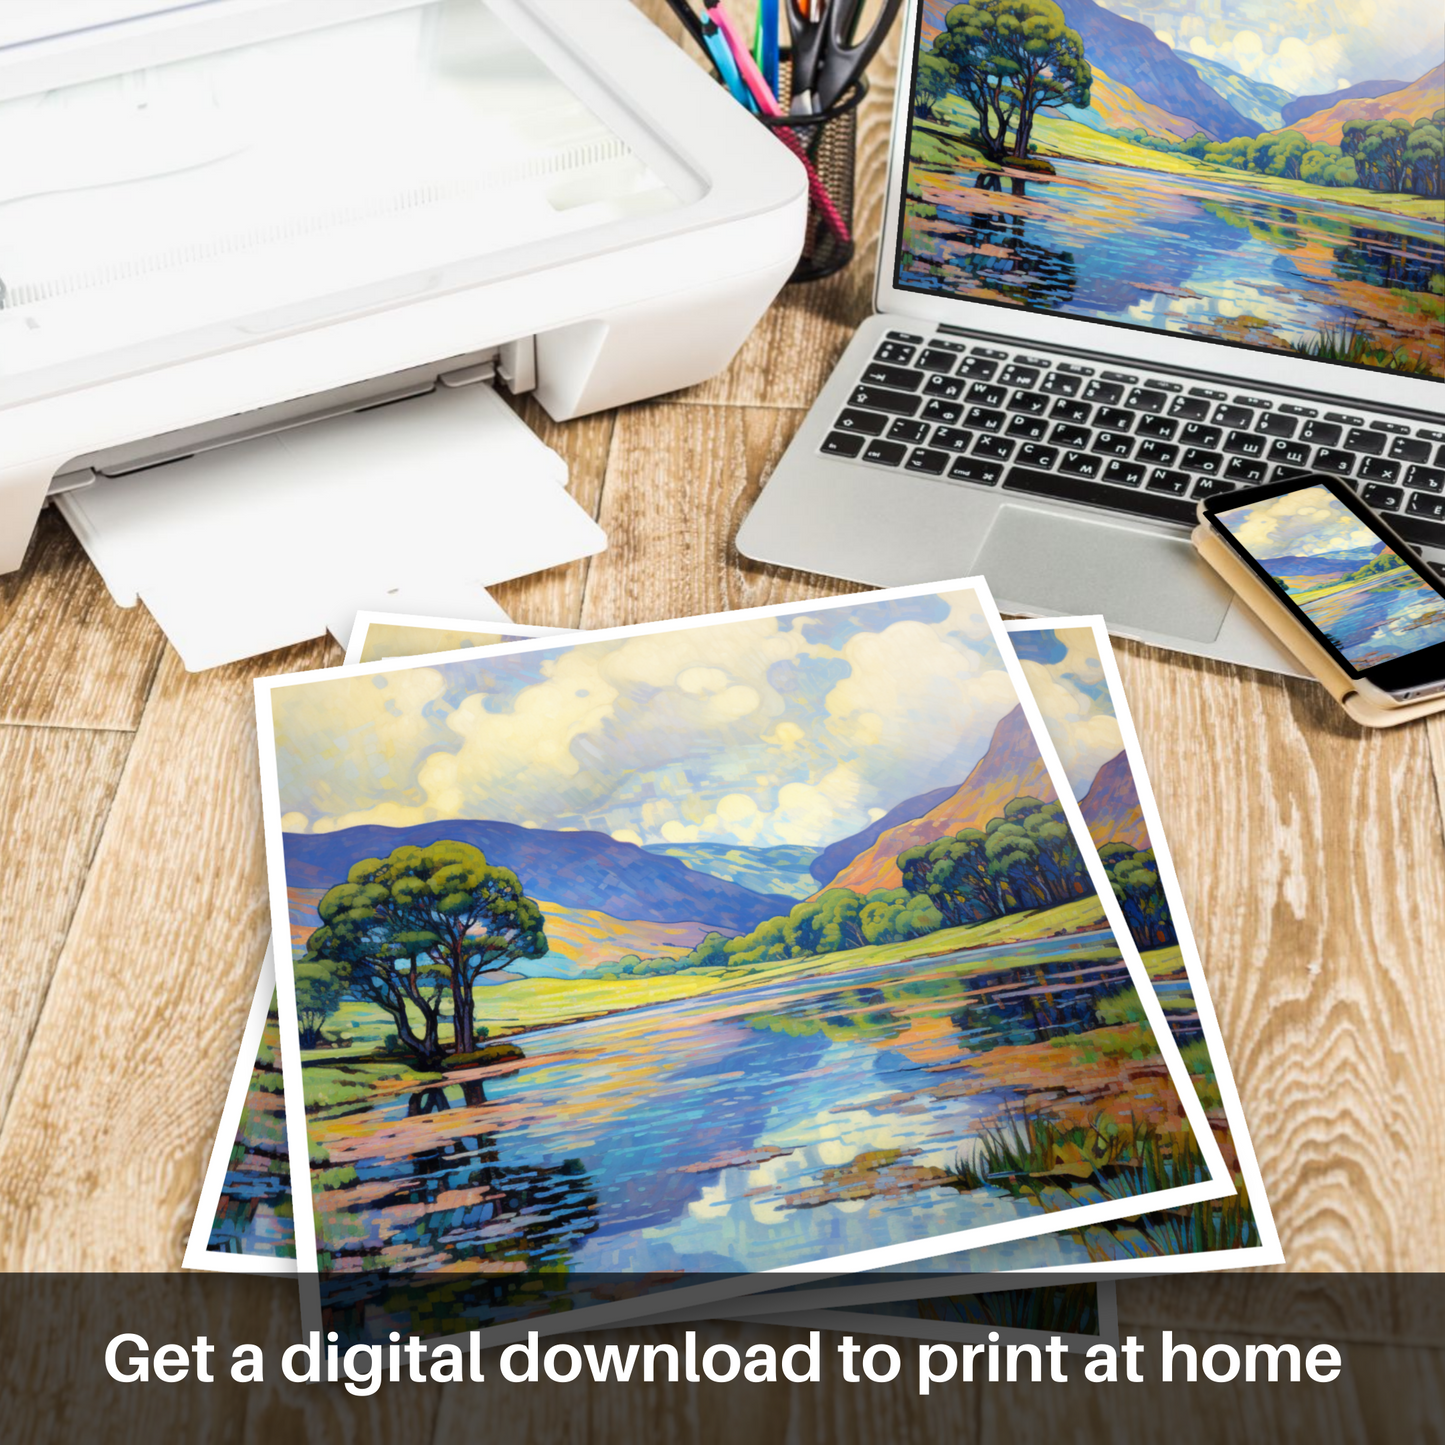 Downloadable and printable picture of Glen Lochay, Perthshire in summer